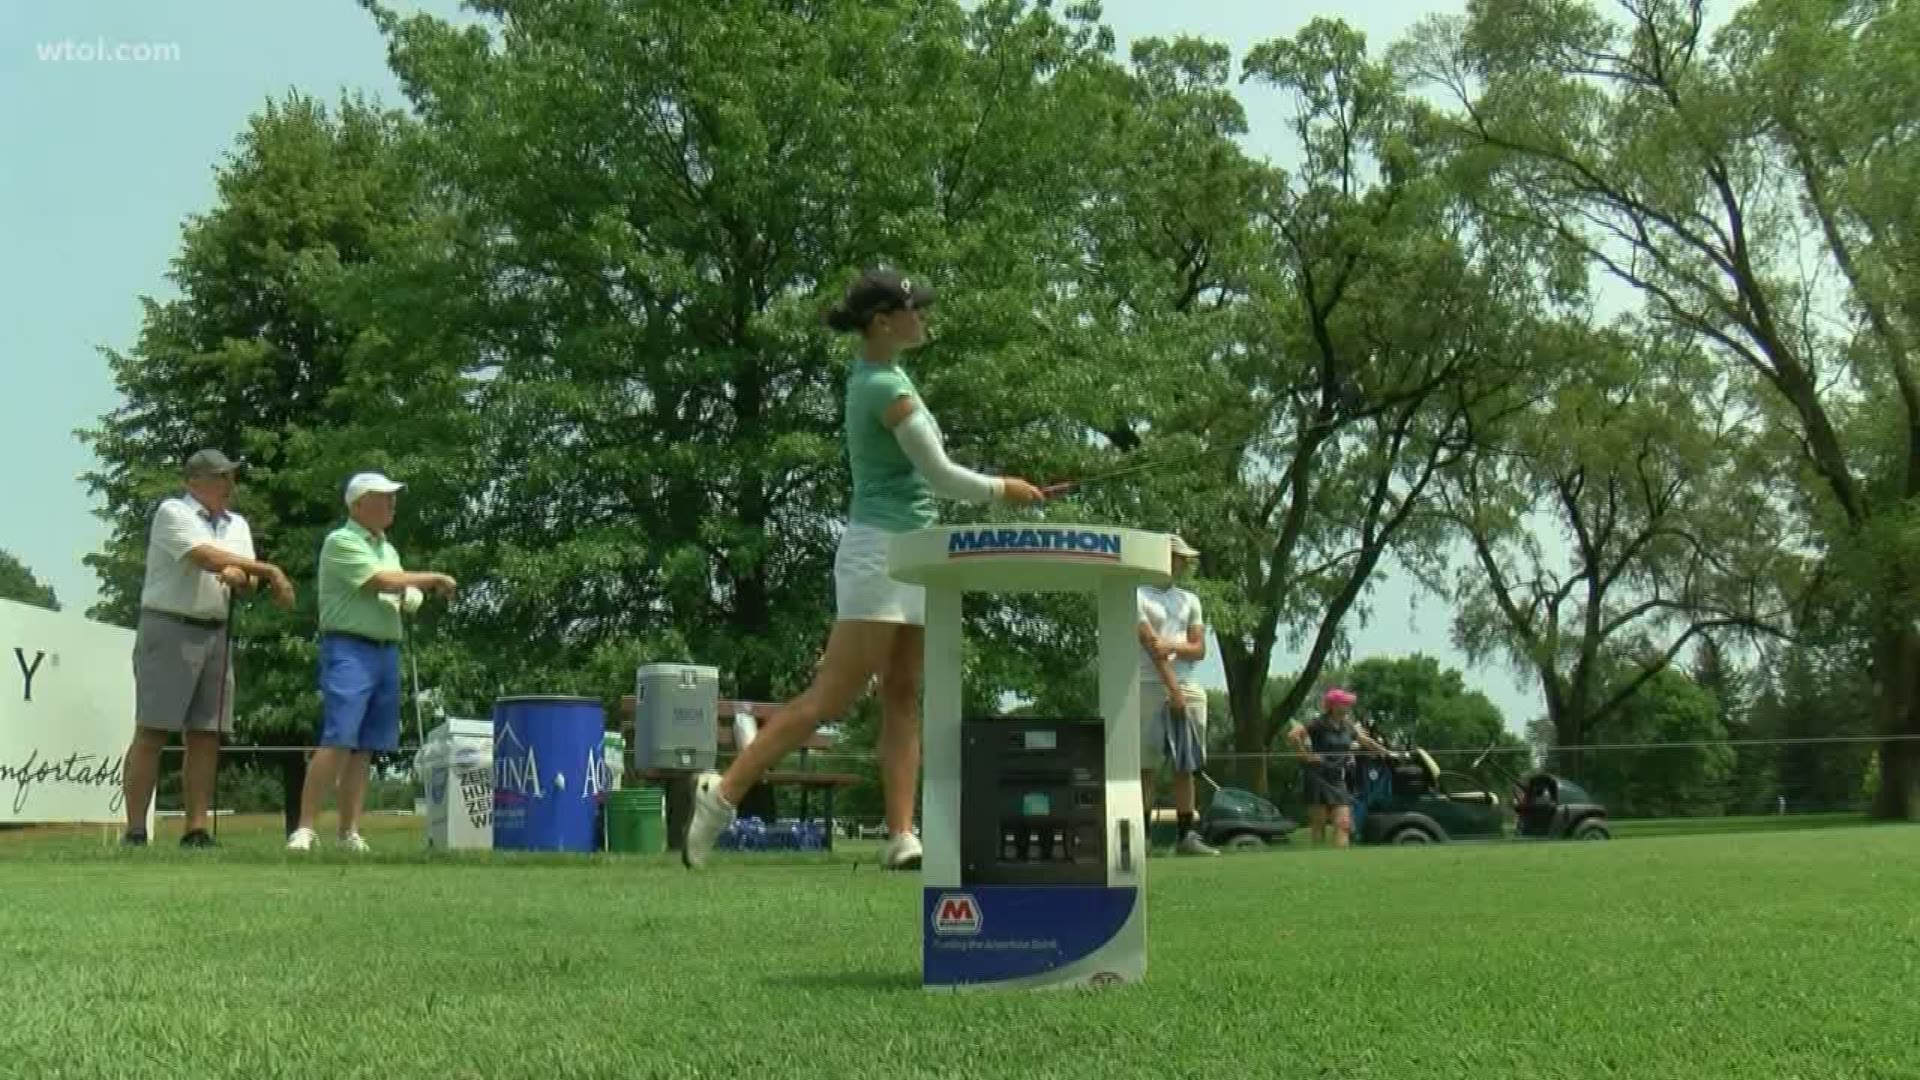 Redding is playing in her first professional golf event at the Marathon Classic in Sylvania.